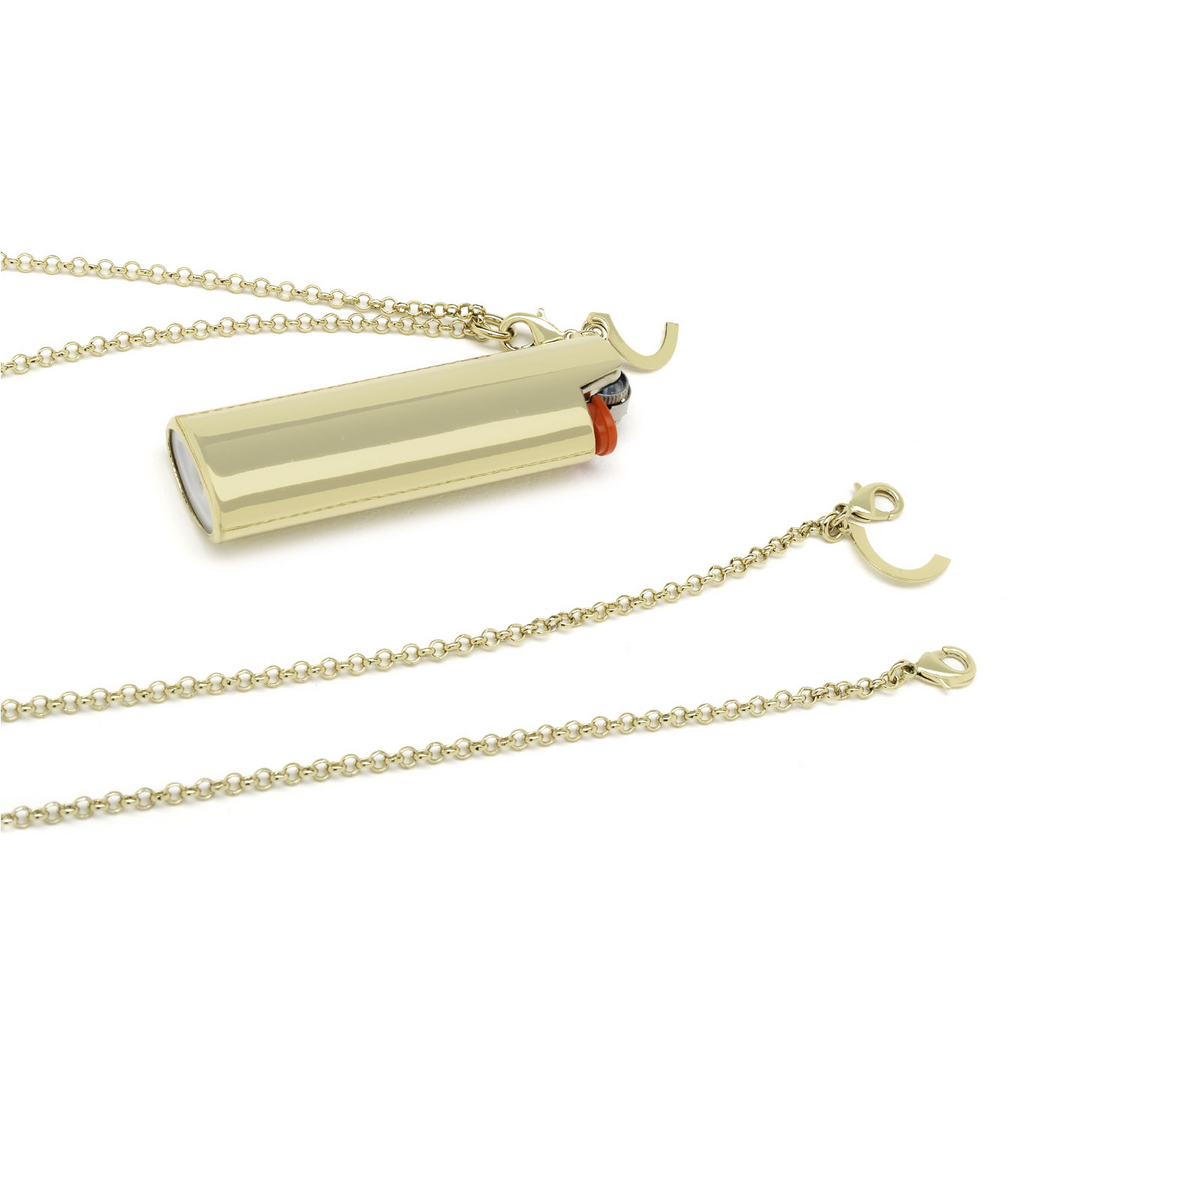 Huma® Accessories: Lighter Holder Charm color Gold Nt - front view.